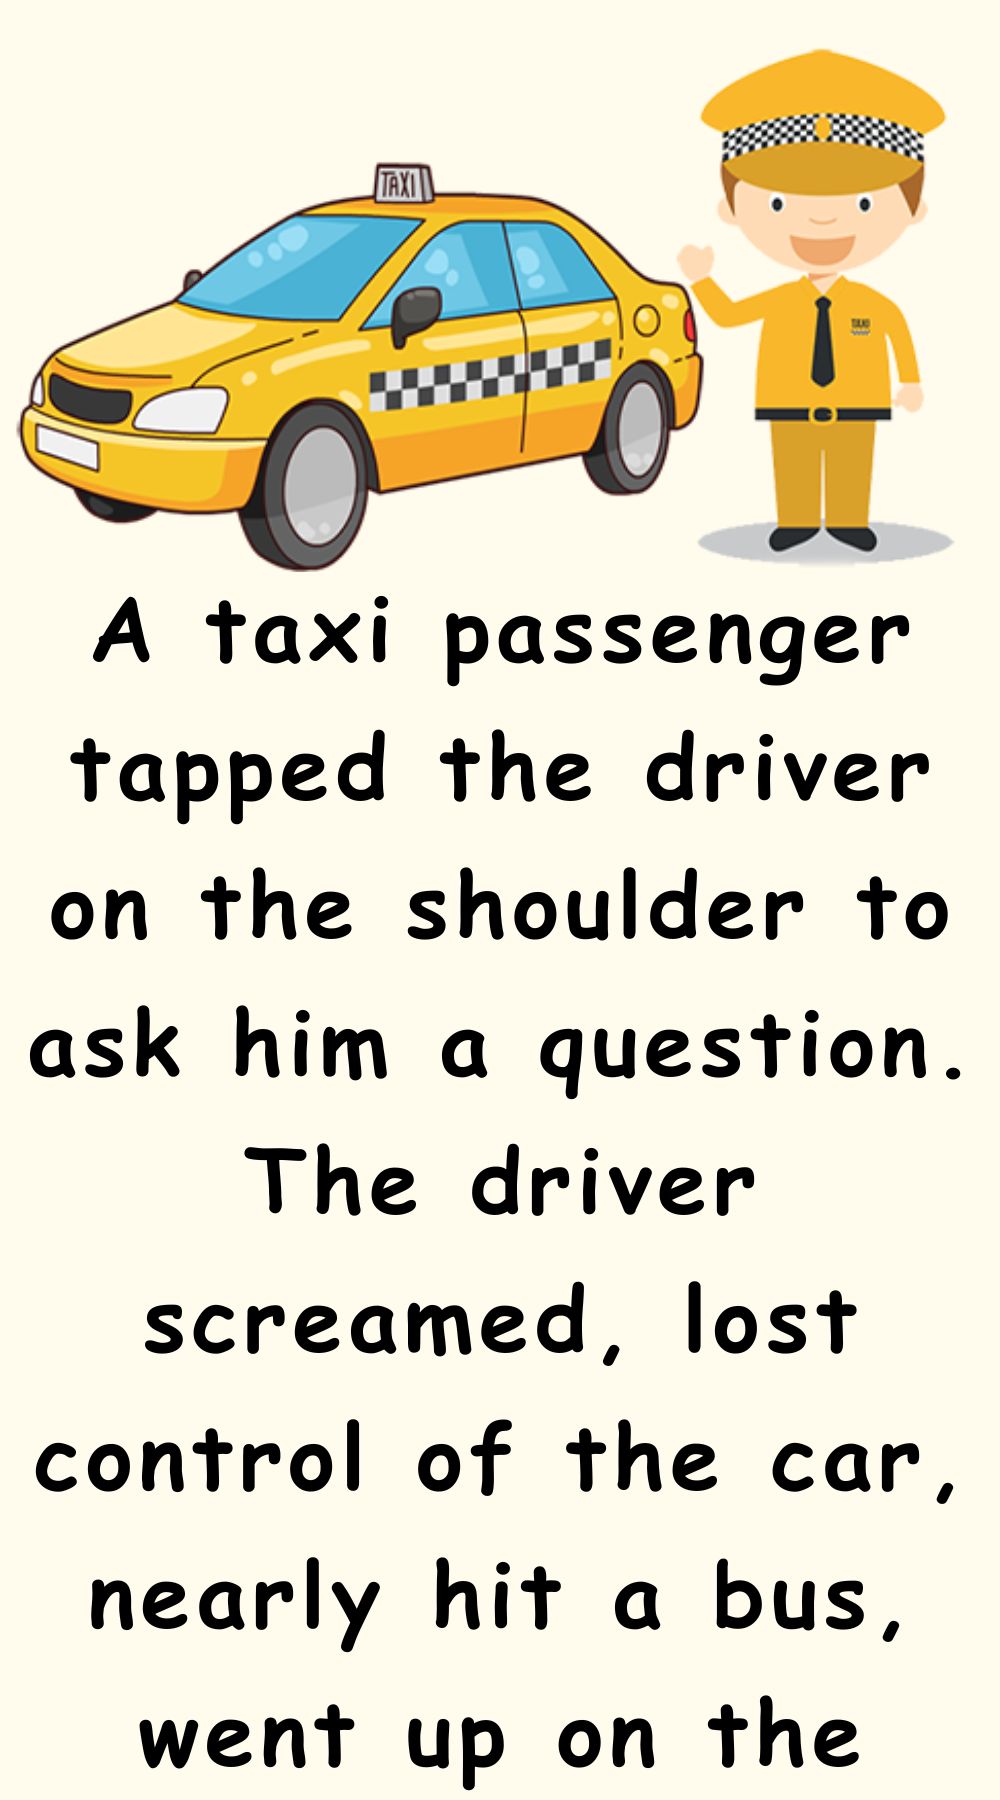 A taxi passenger tapped the driver on the shoulder